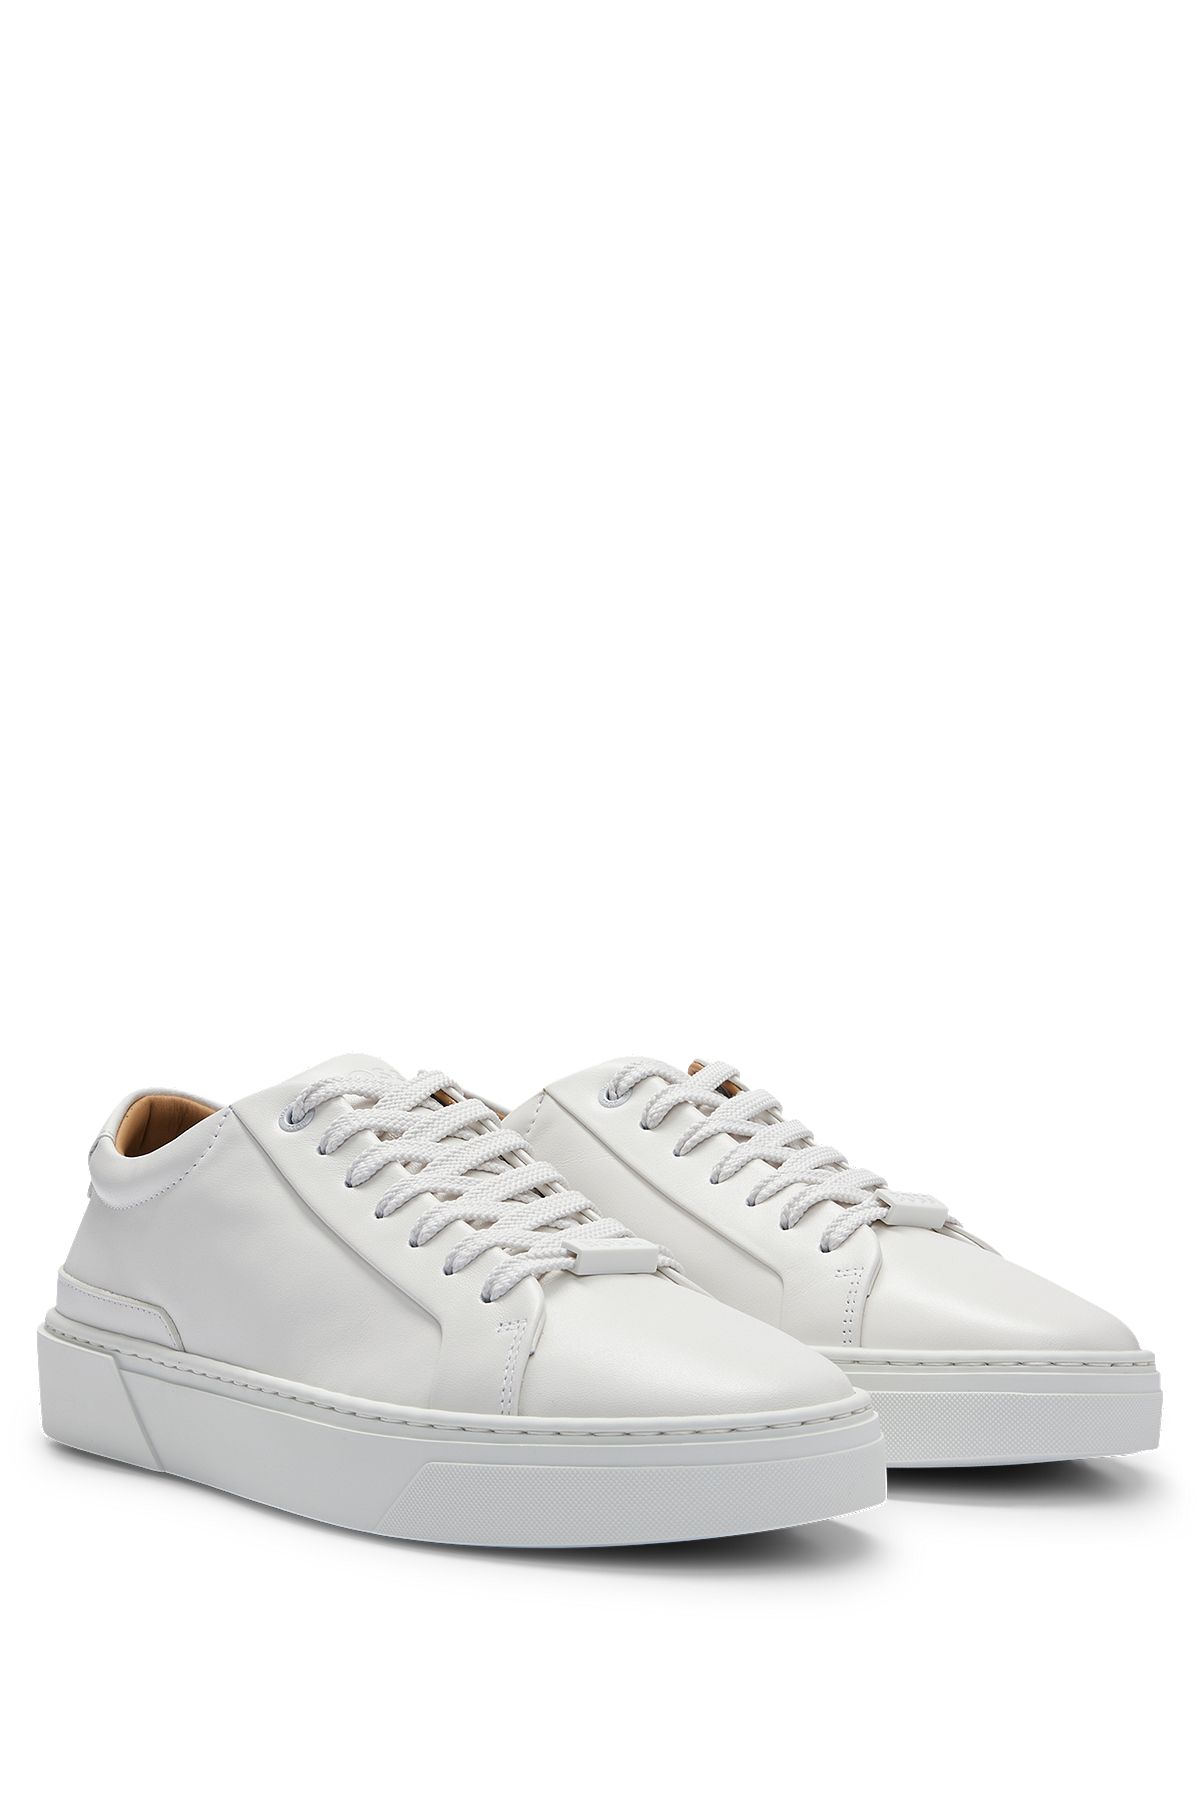 Leather low-profile trainers with branding and rubber outsole, White